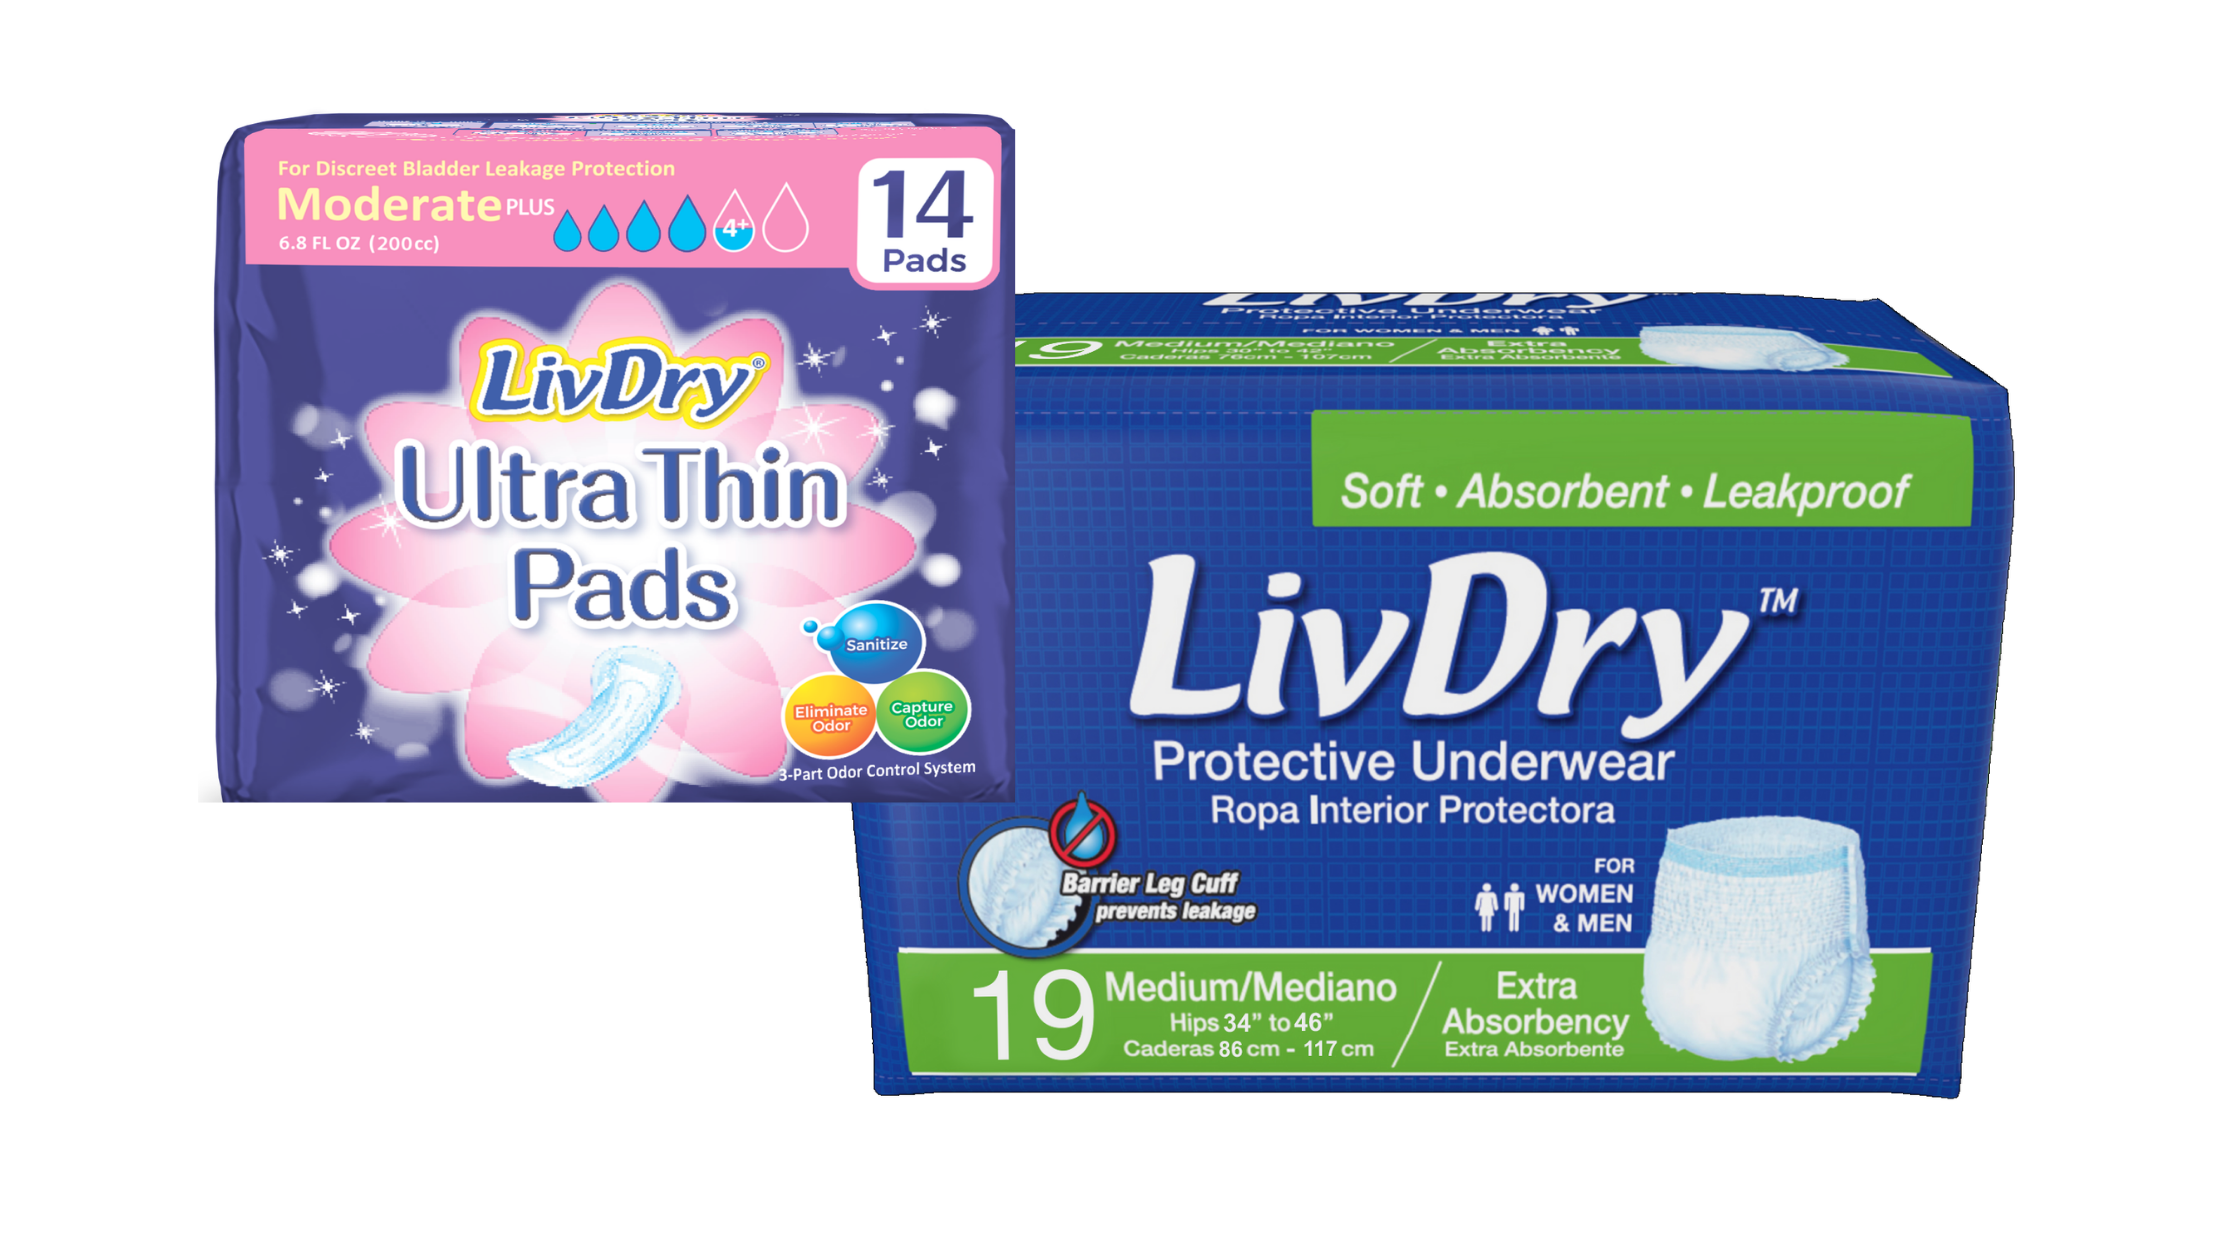 LivDry Ultra-Thin Pads and LivDry Medium Protective Underwear